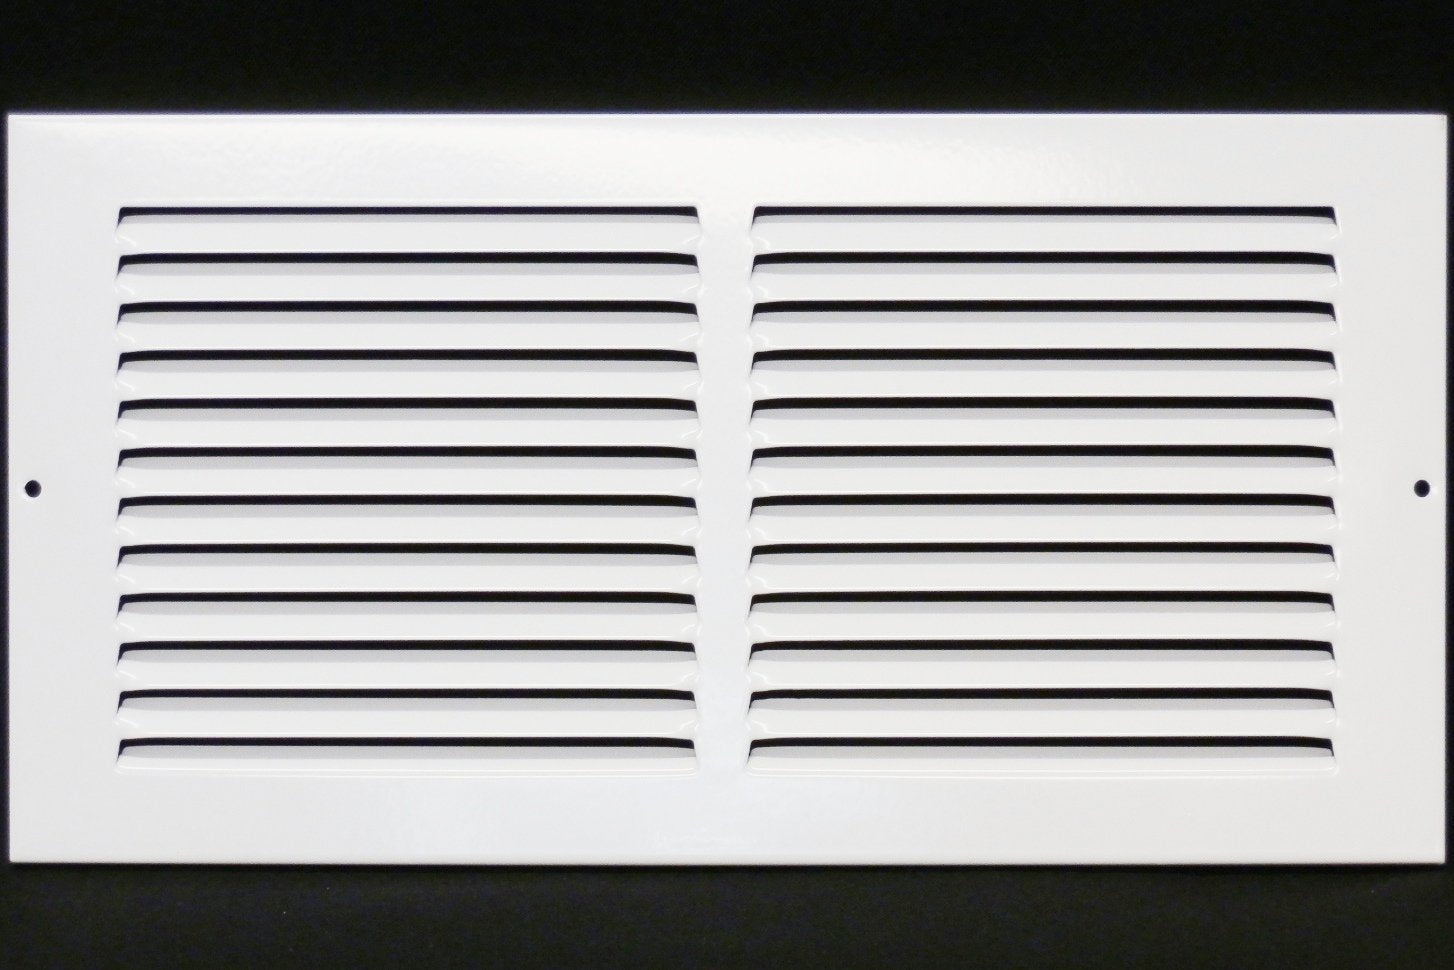 14" X 4" Air Vent Return Grilles - Sidewall and Ceiling - Steel